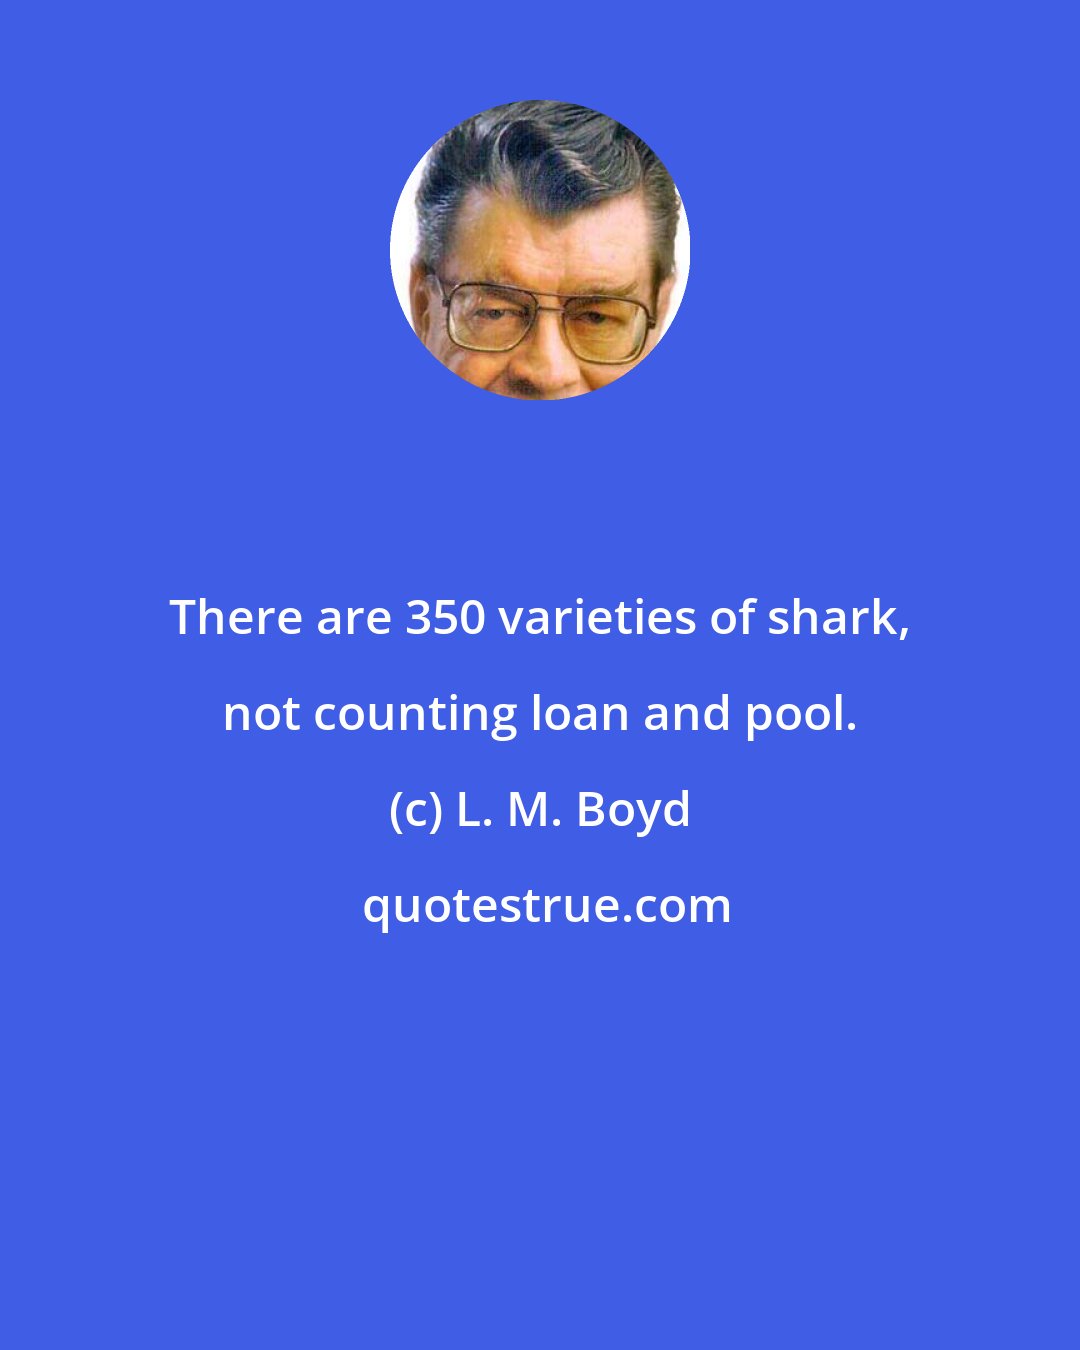 L. M. Boyd: There are 350 varieties of shark, not counting loan and pool.